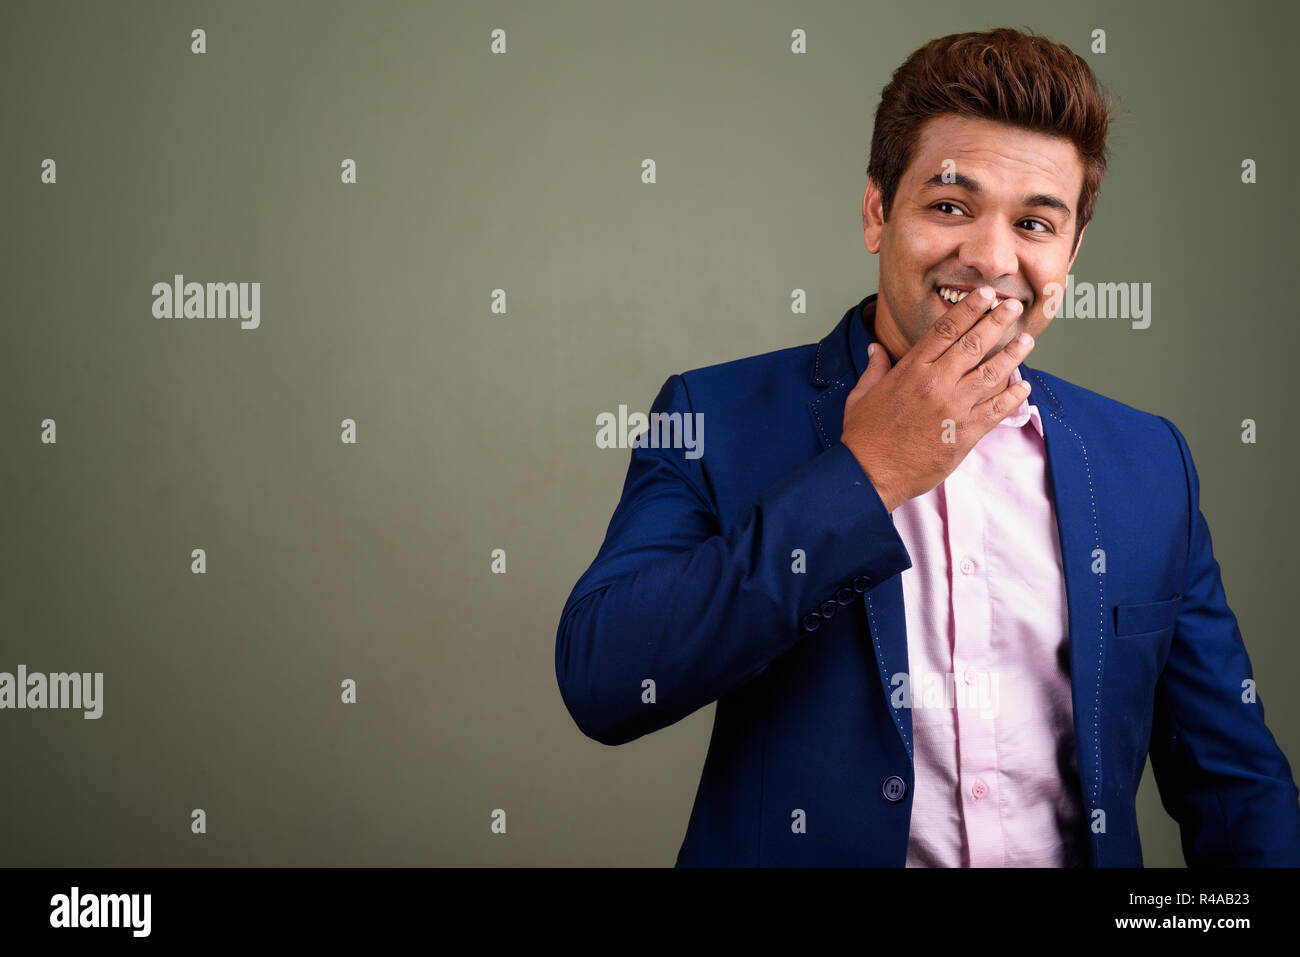 Indian businessman wearing suit against colored background Stock Photo